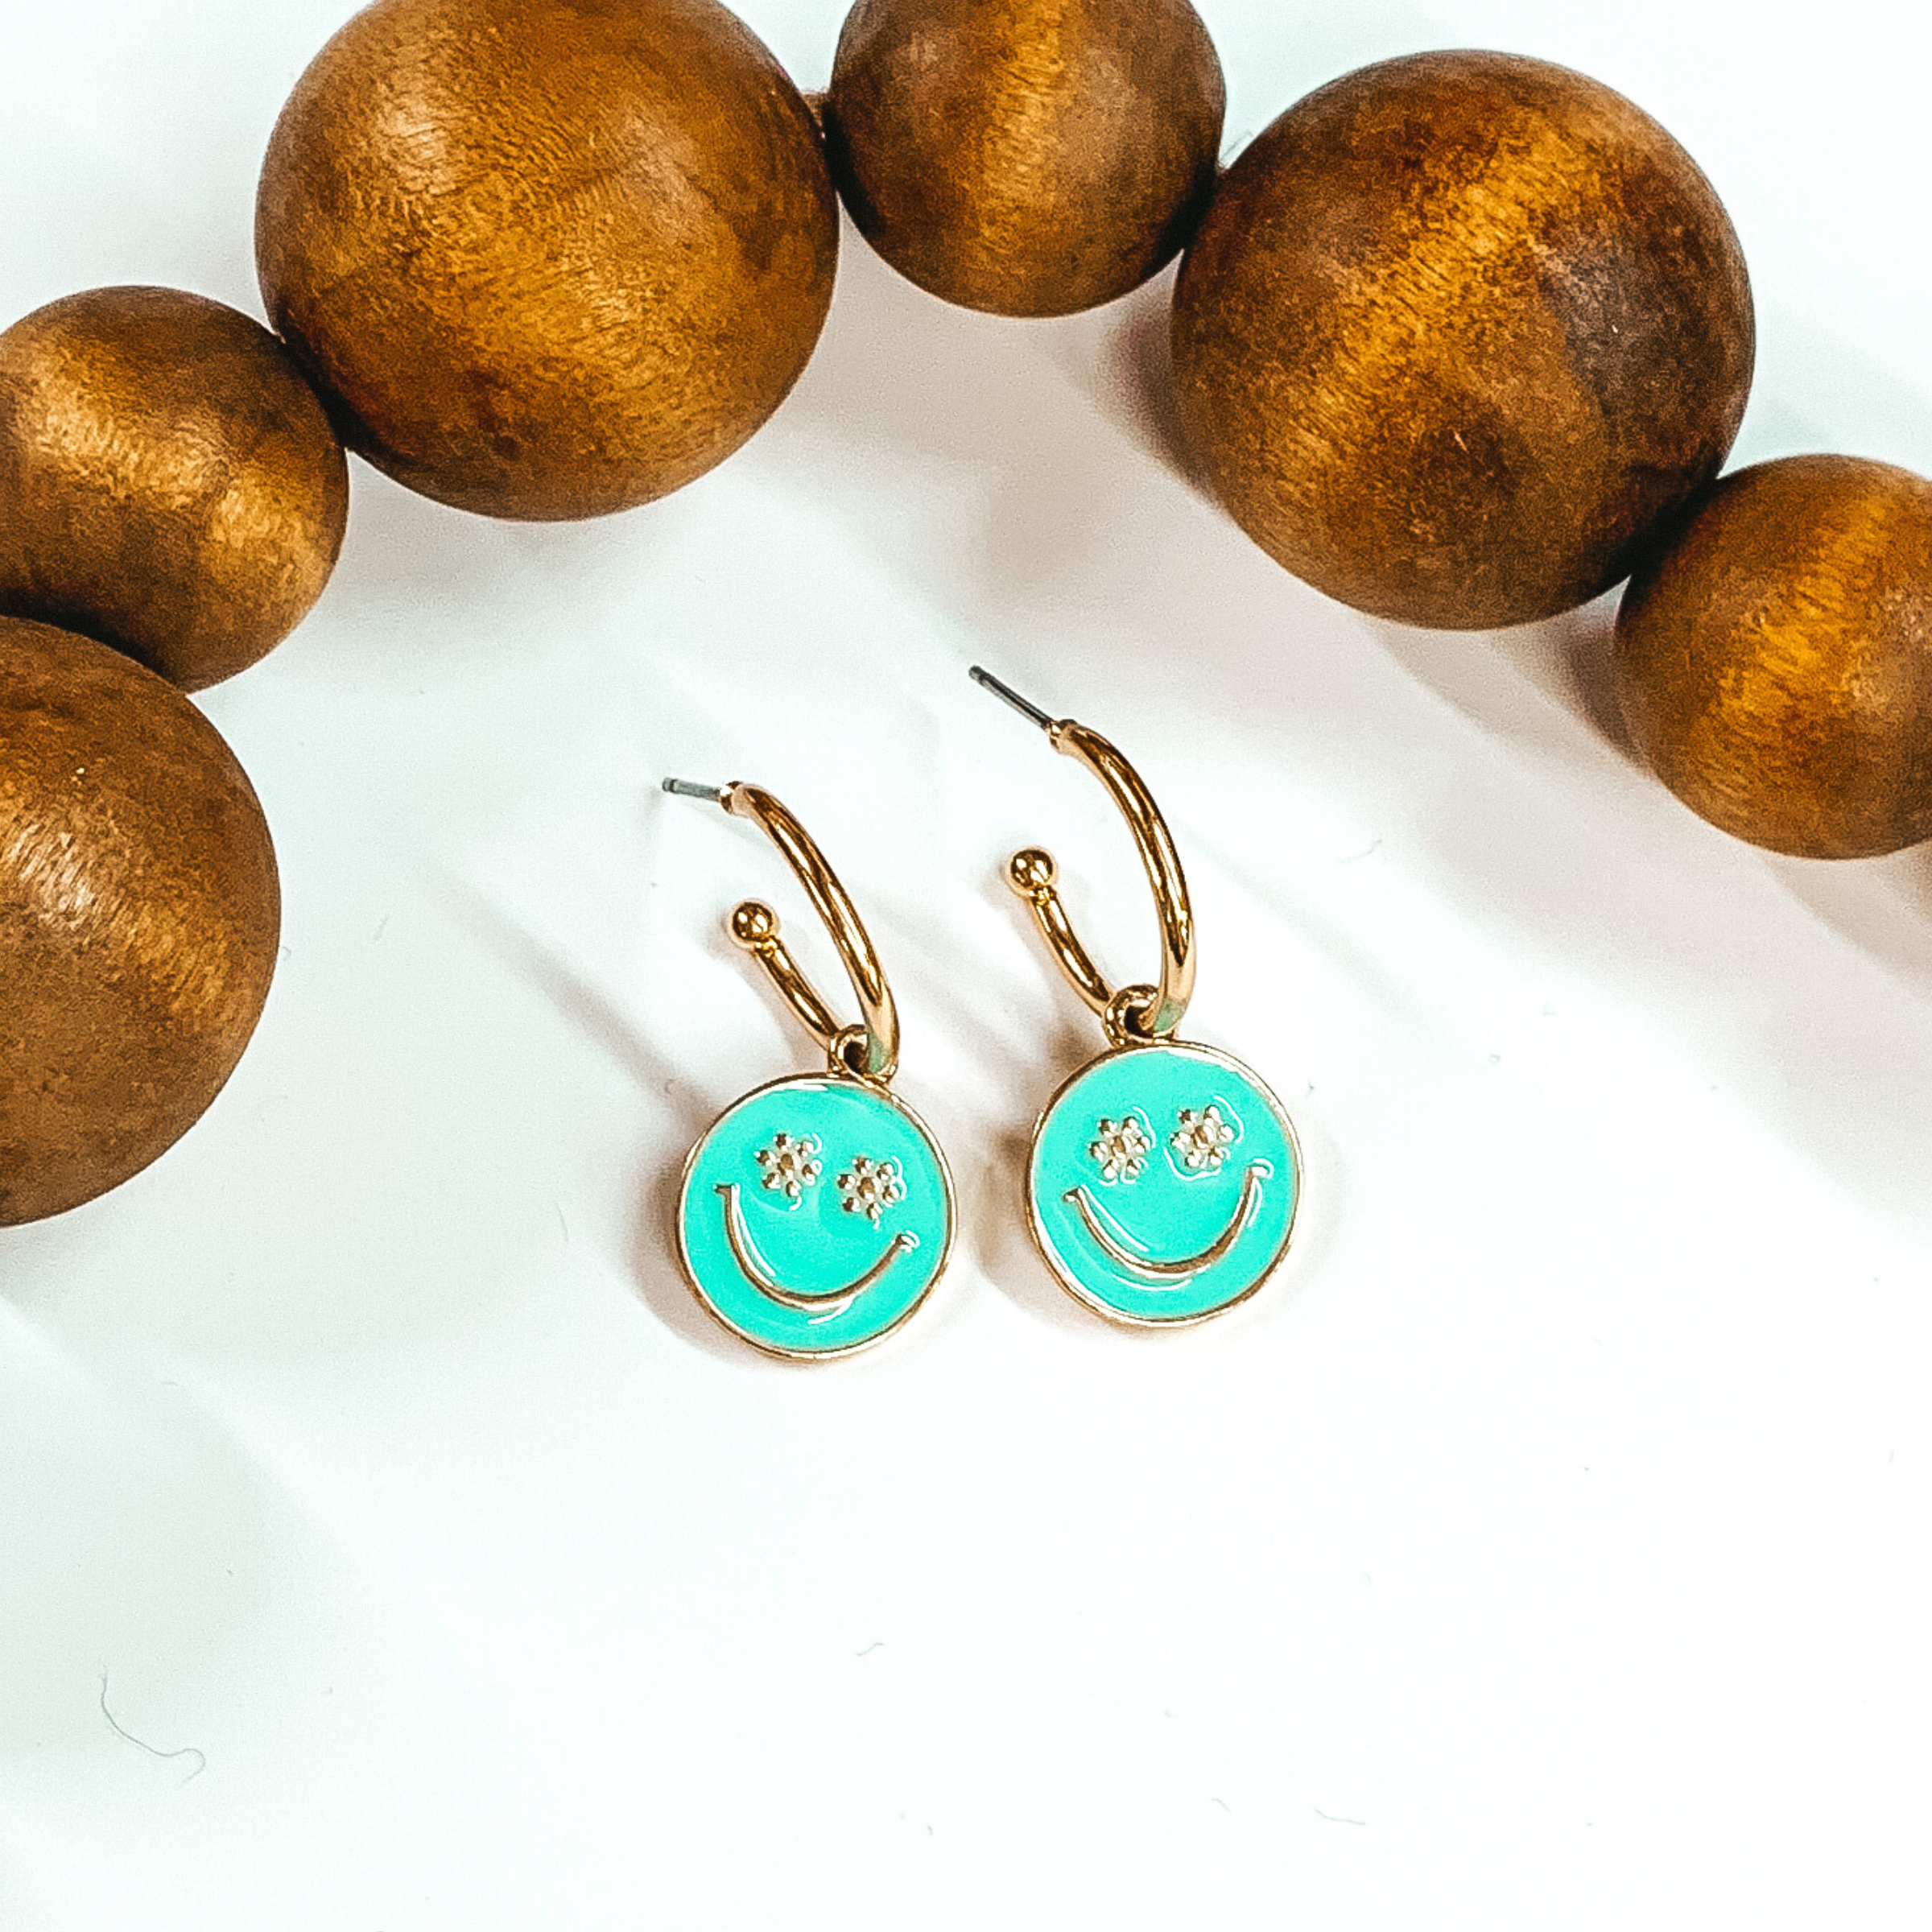 Small, gold hoop earrings with a hanging circle pendant in aqua. The pendant has a gold smiley face with the eyes being small flowers. These earrings are pictured laying on a white background with dark brown beads at the top of the picture. 